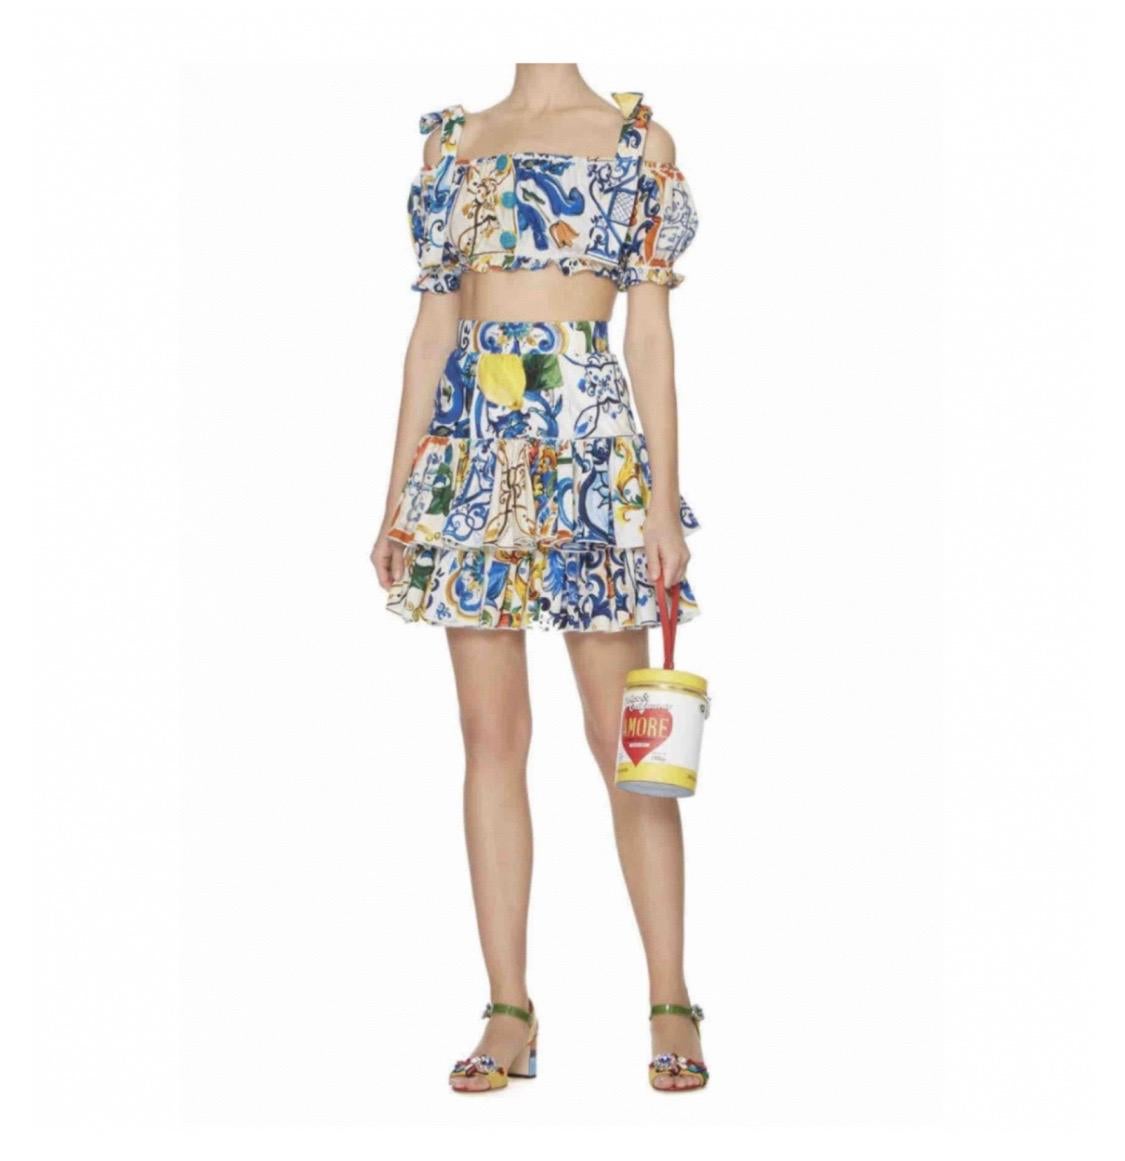 Dolce & Gabbana Iconic Sicily
Majolica printed cotton skirt

Size 40IT UK8, S.

100% cotton

Brand new with original tags!

Please check my other DG clothing &

beachwear & shoes & accessories in
this beautiful Mediterranean print!
